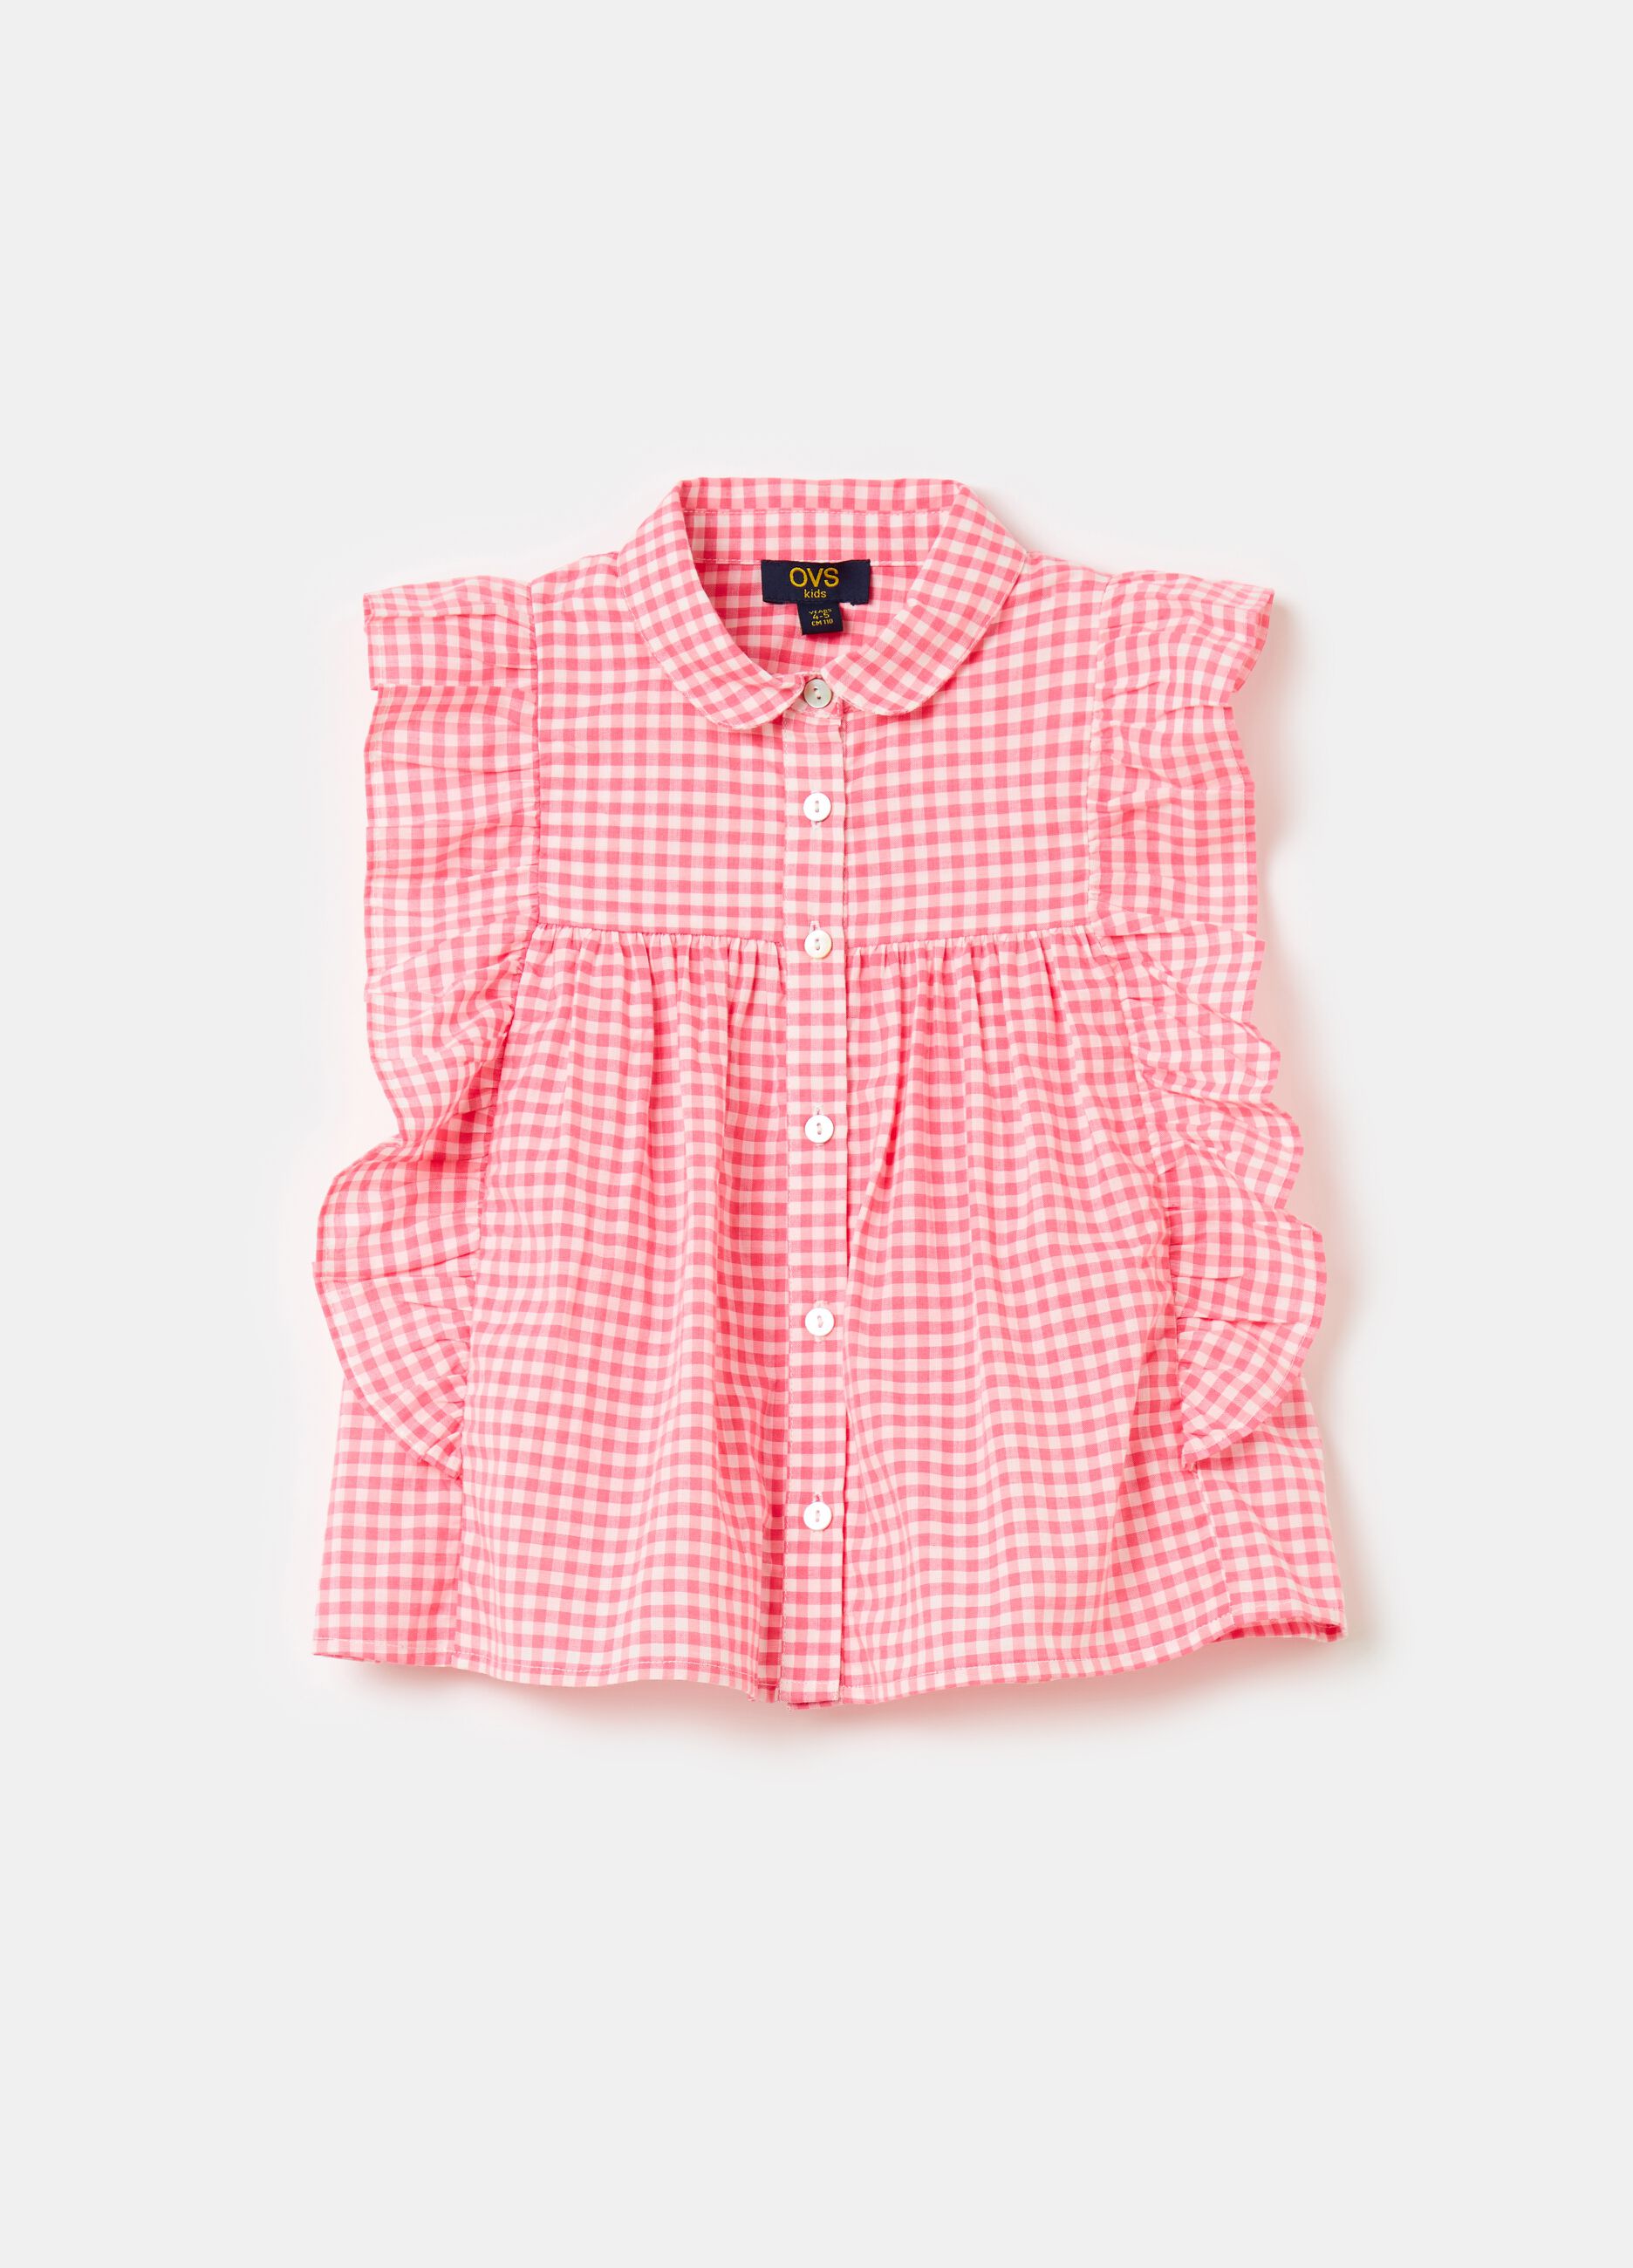 Gingham shirt with flounce